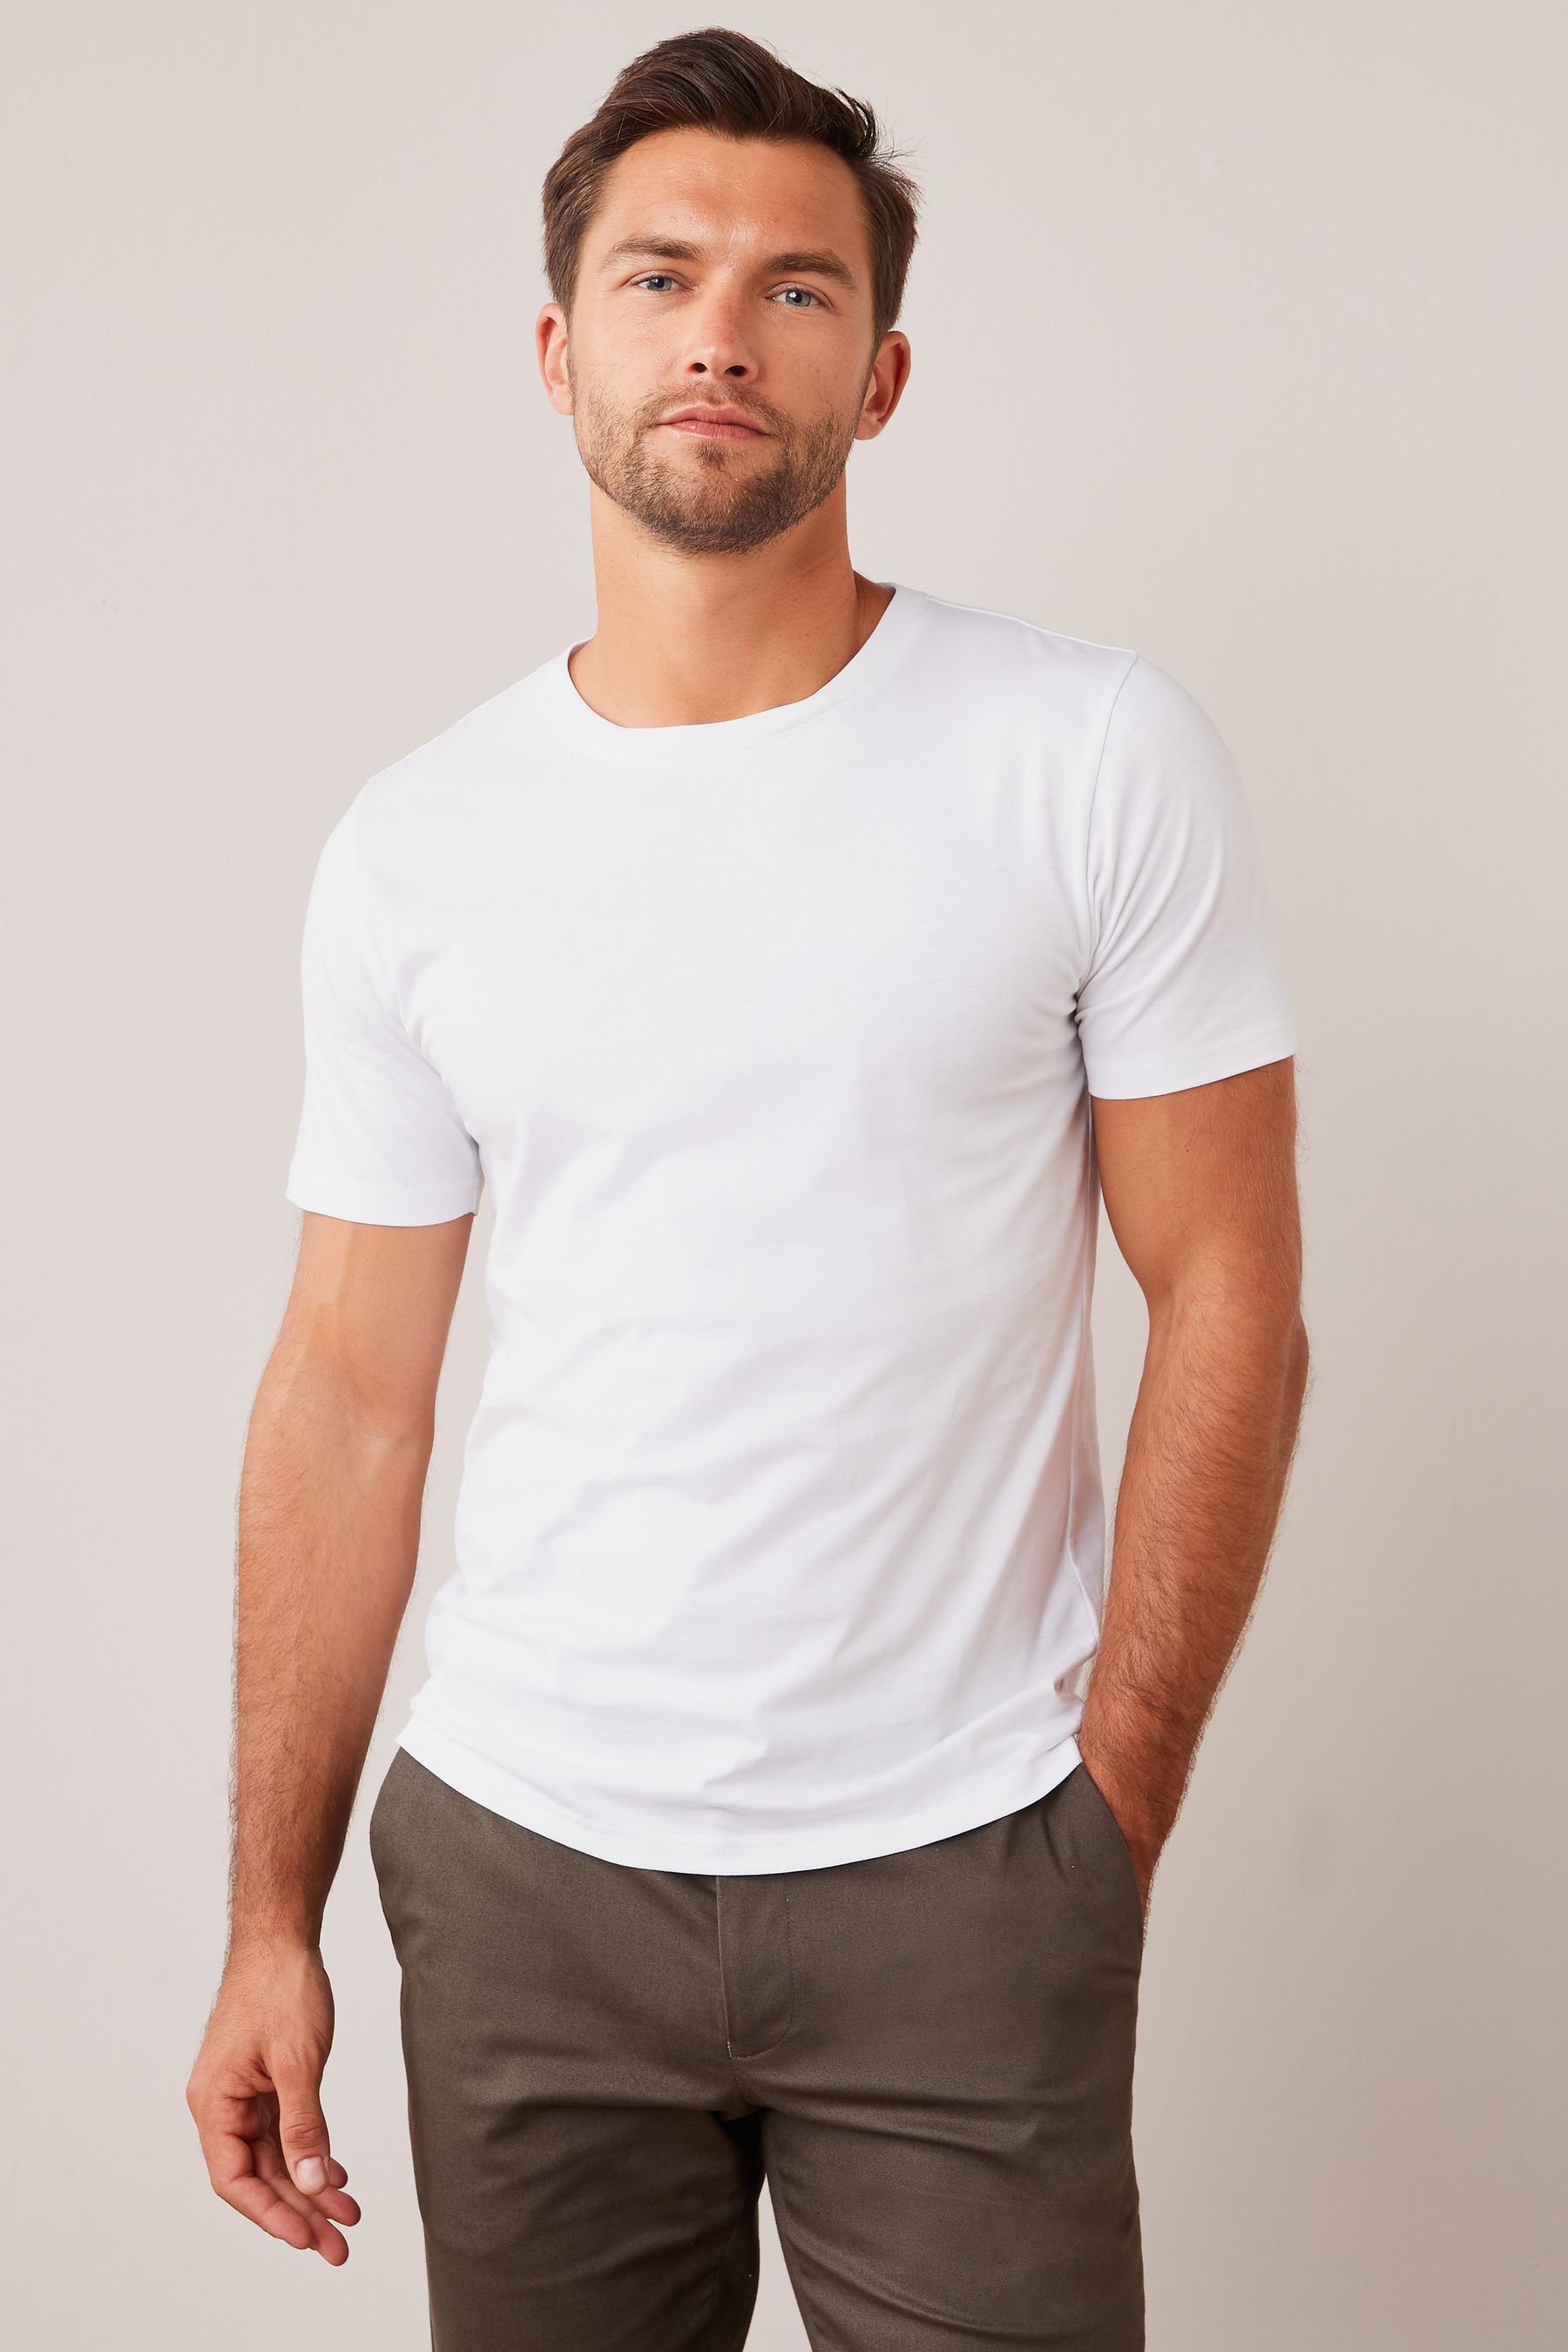 Buy White Slim Fit Essential Crew Neck T-Shirt from the Next UK online shop